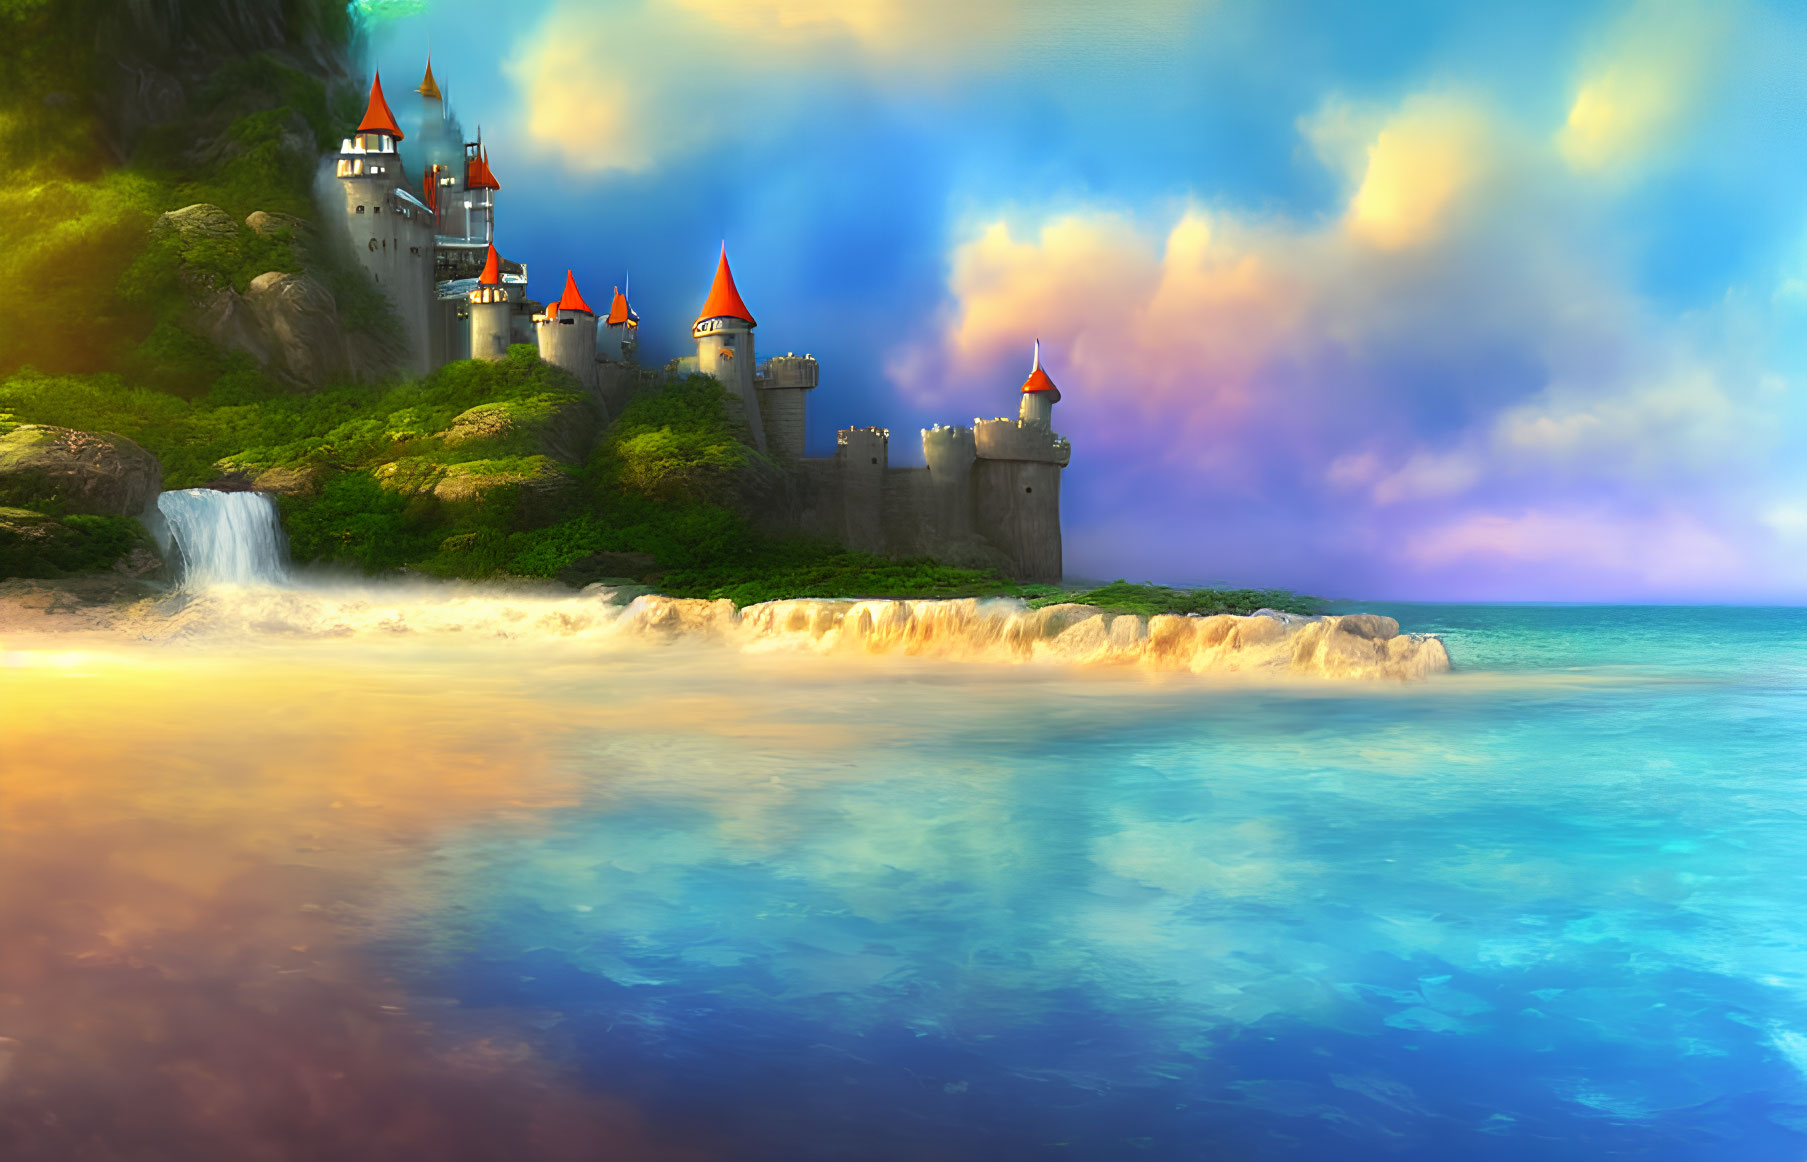 Fairytale castle with red-roofed towers on cliff overlooking beach